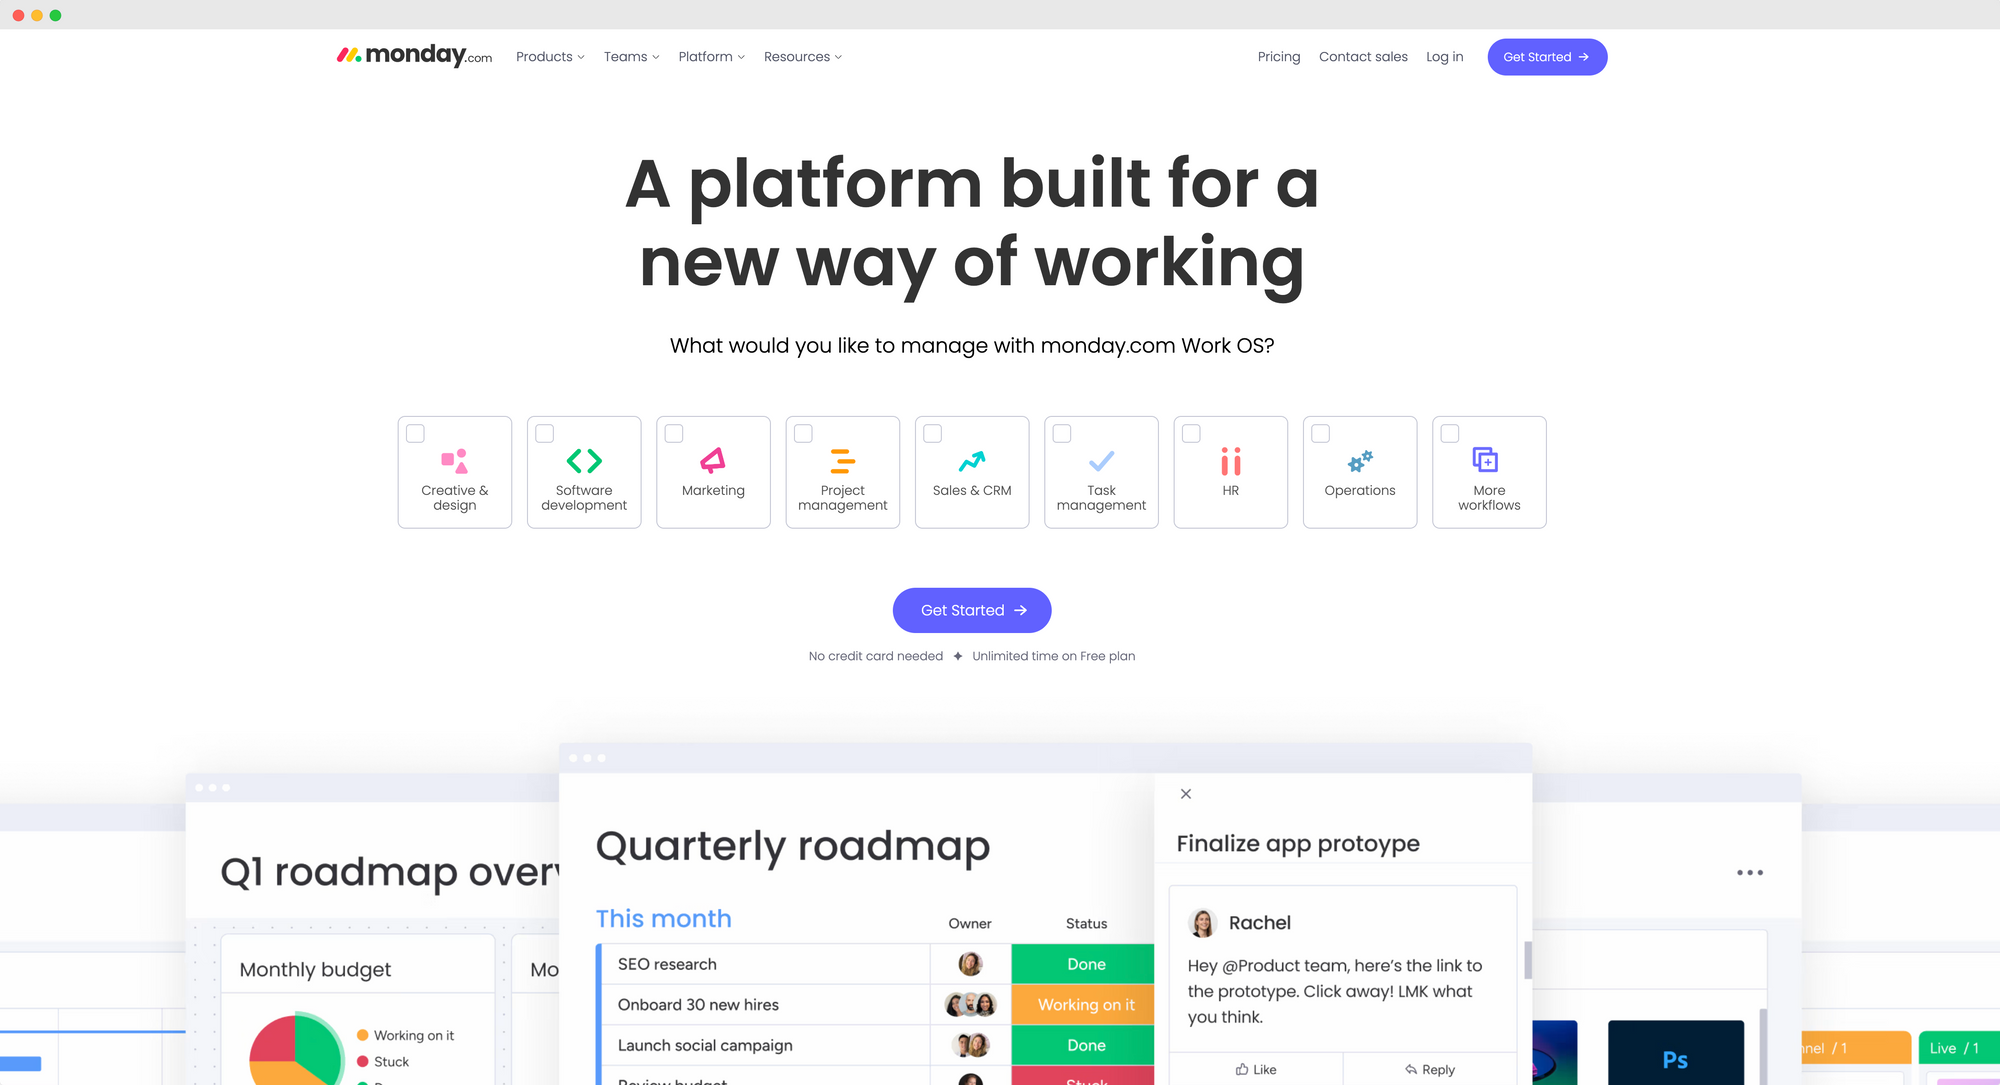 Monday.com's homepage with navigation options and workflow templates